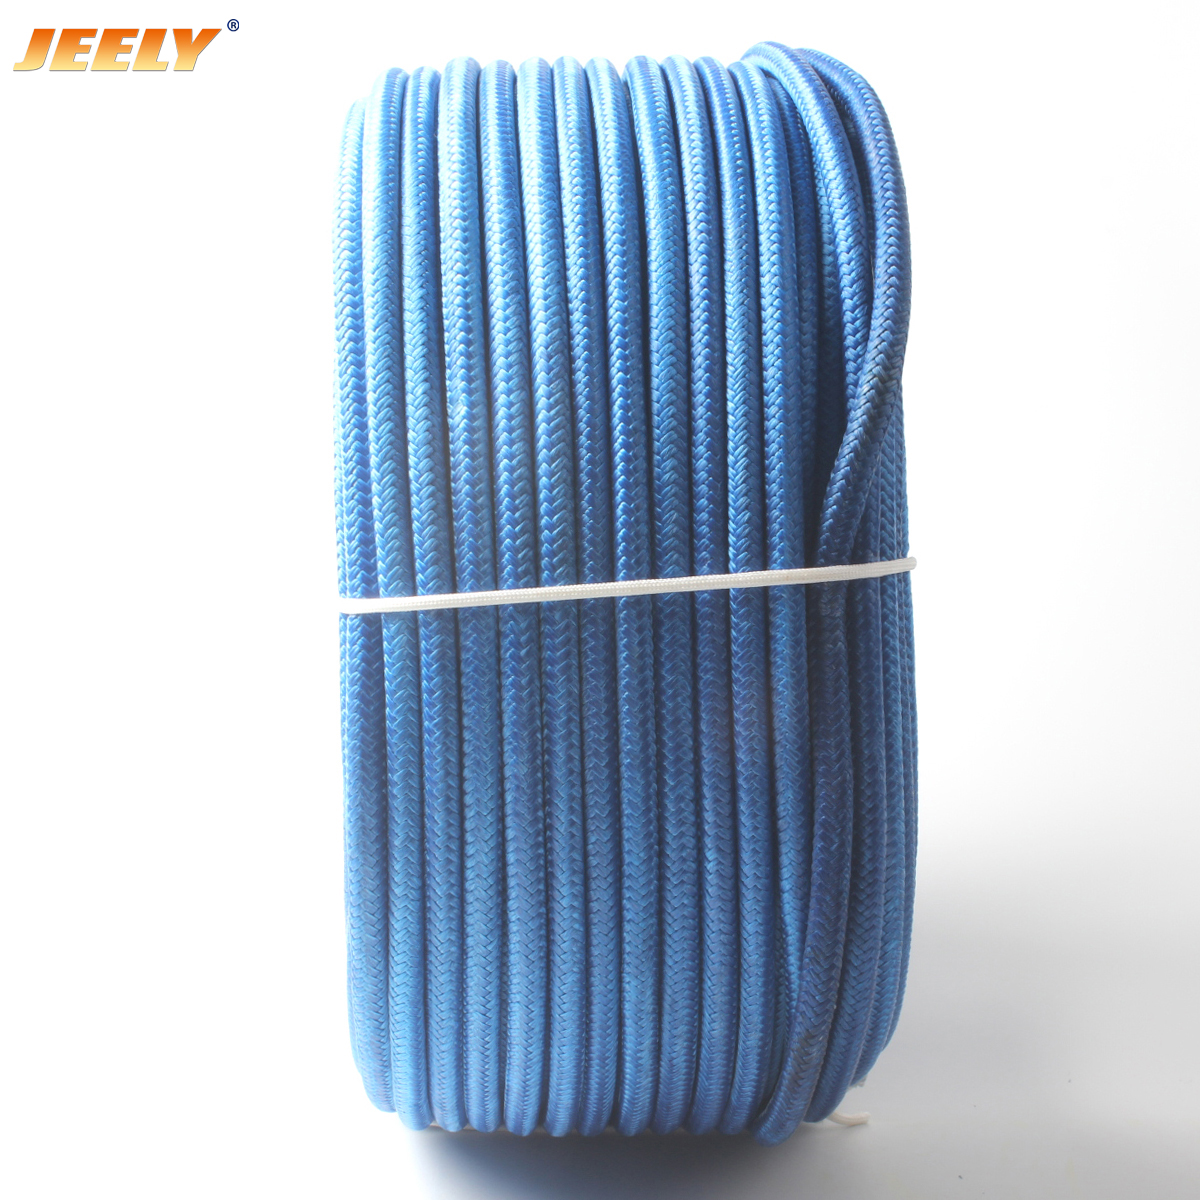 13mm 100m UHMWPE Core with Polyester Covering Sailboat Winch Tow Rope